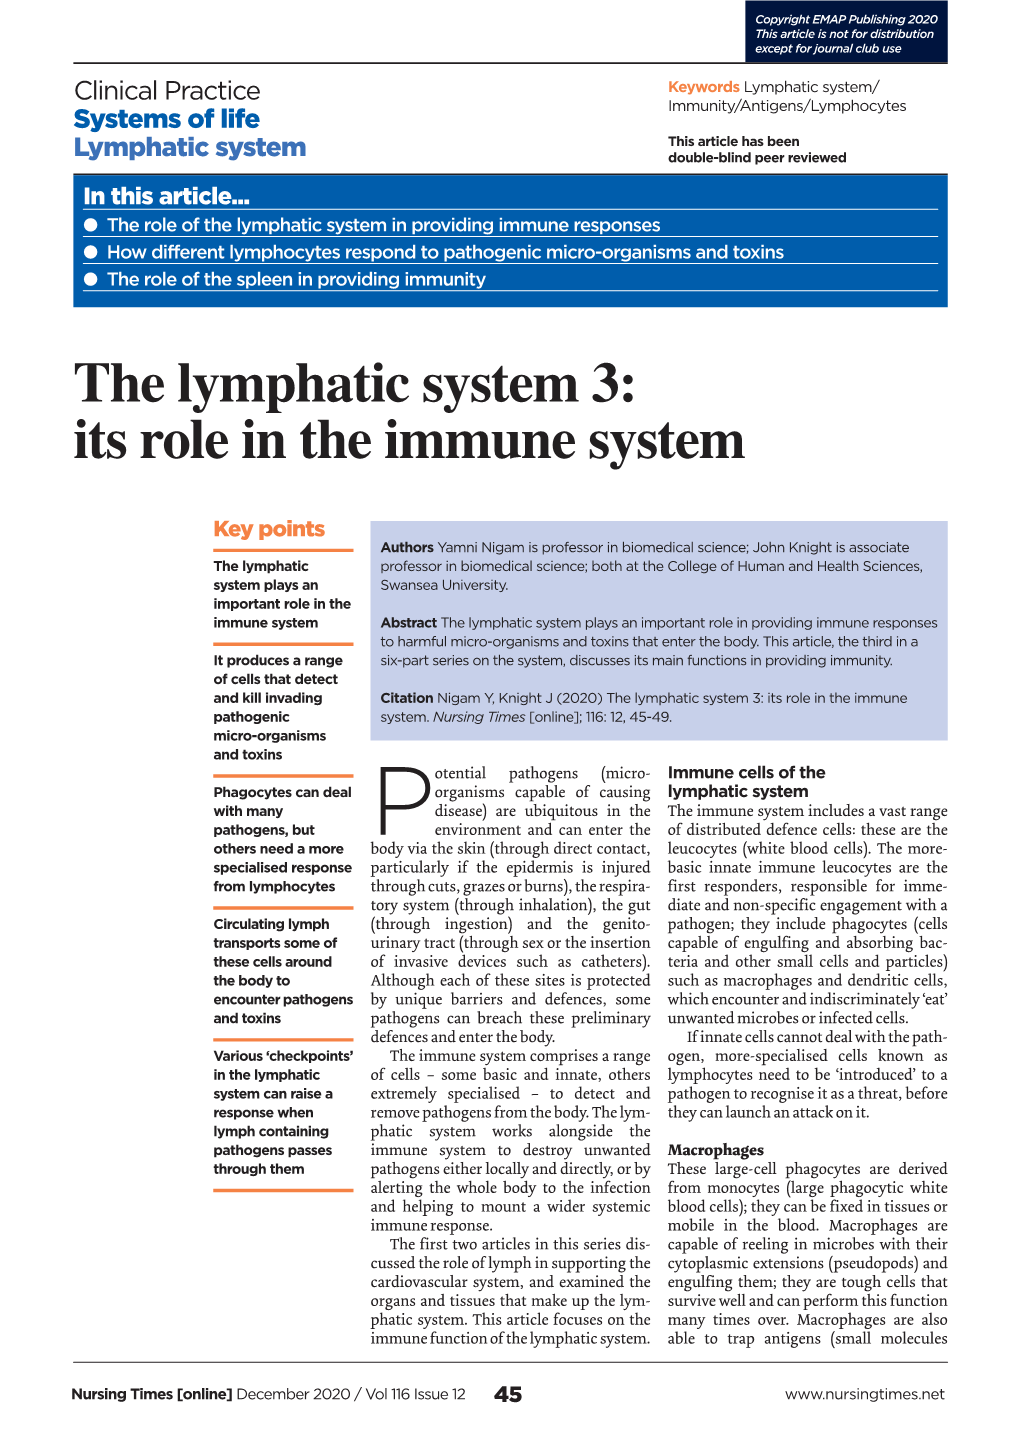 The Lymphatic System 3: Its Role in the Immune System